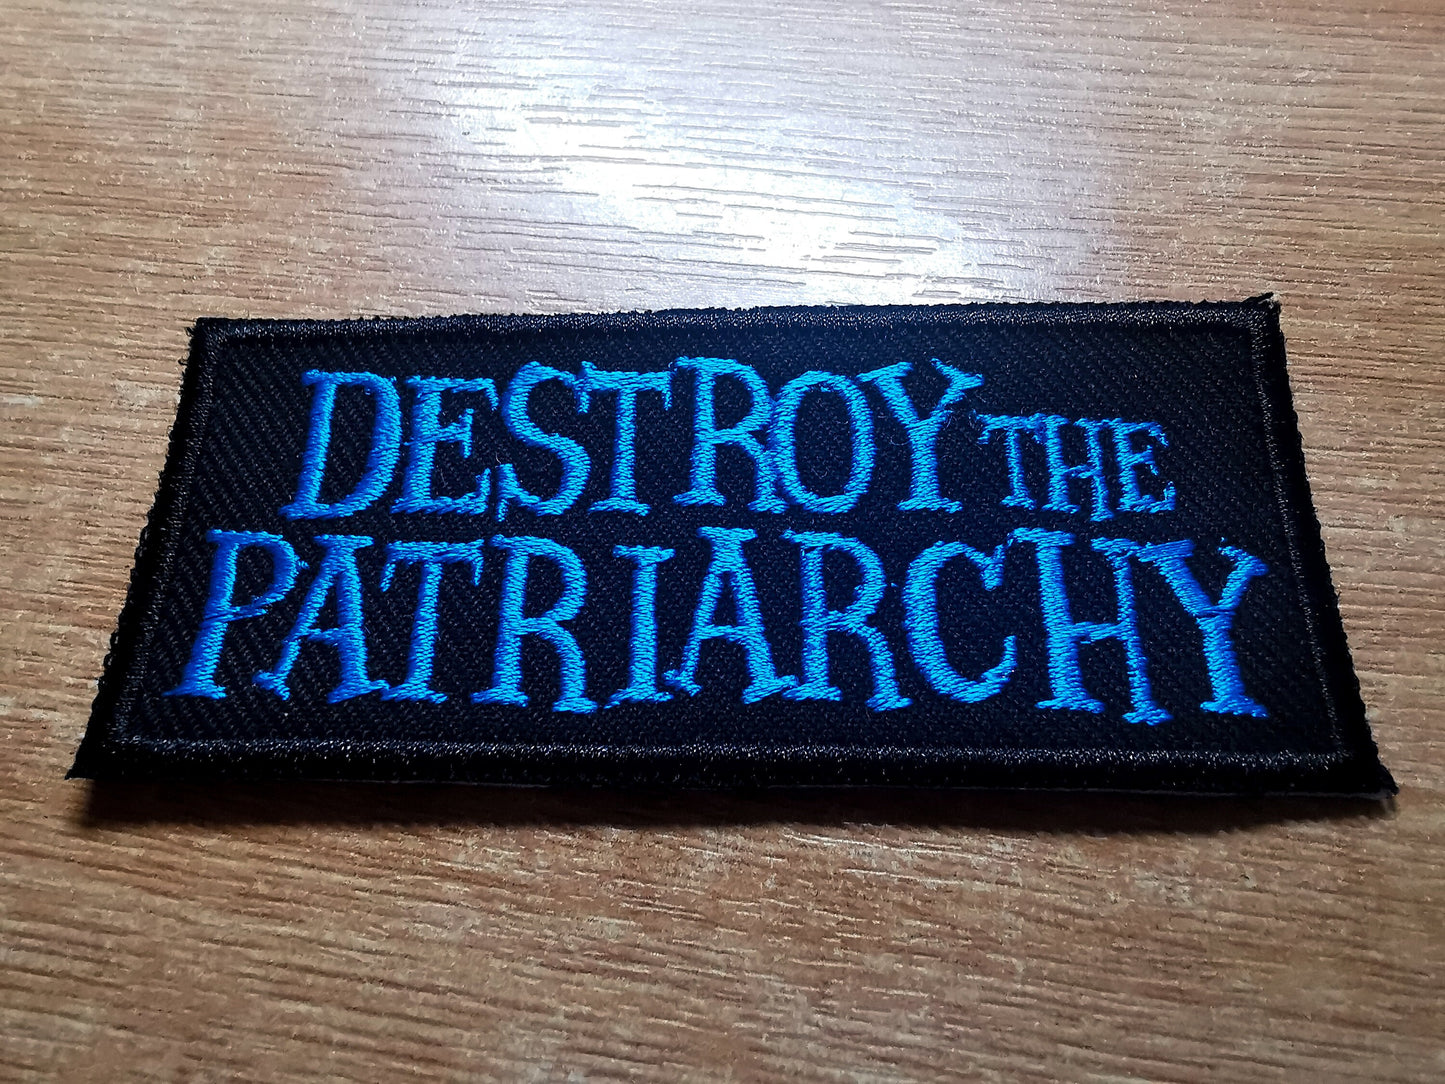 Destroy the Patriarchy Iron On Embroidered Patch Blue Feminist and Feminism anti-misogyny Protest patches